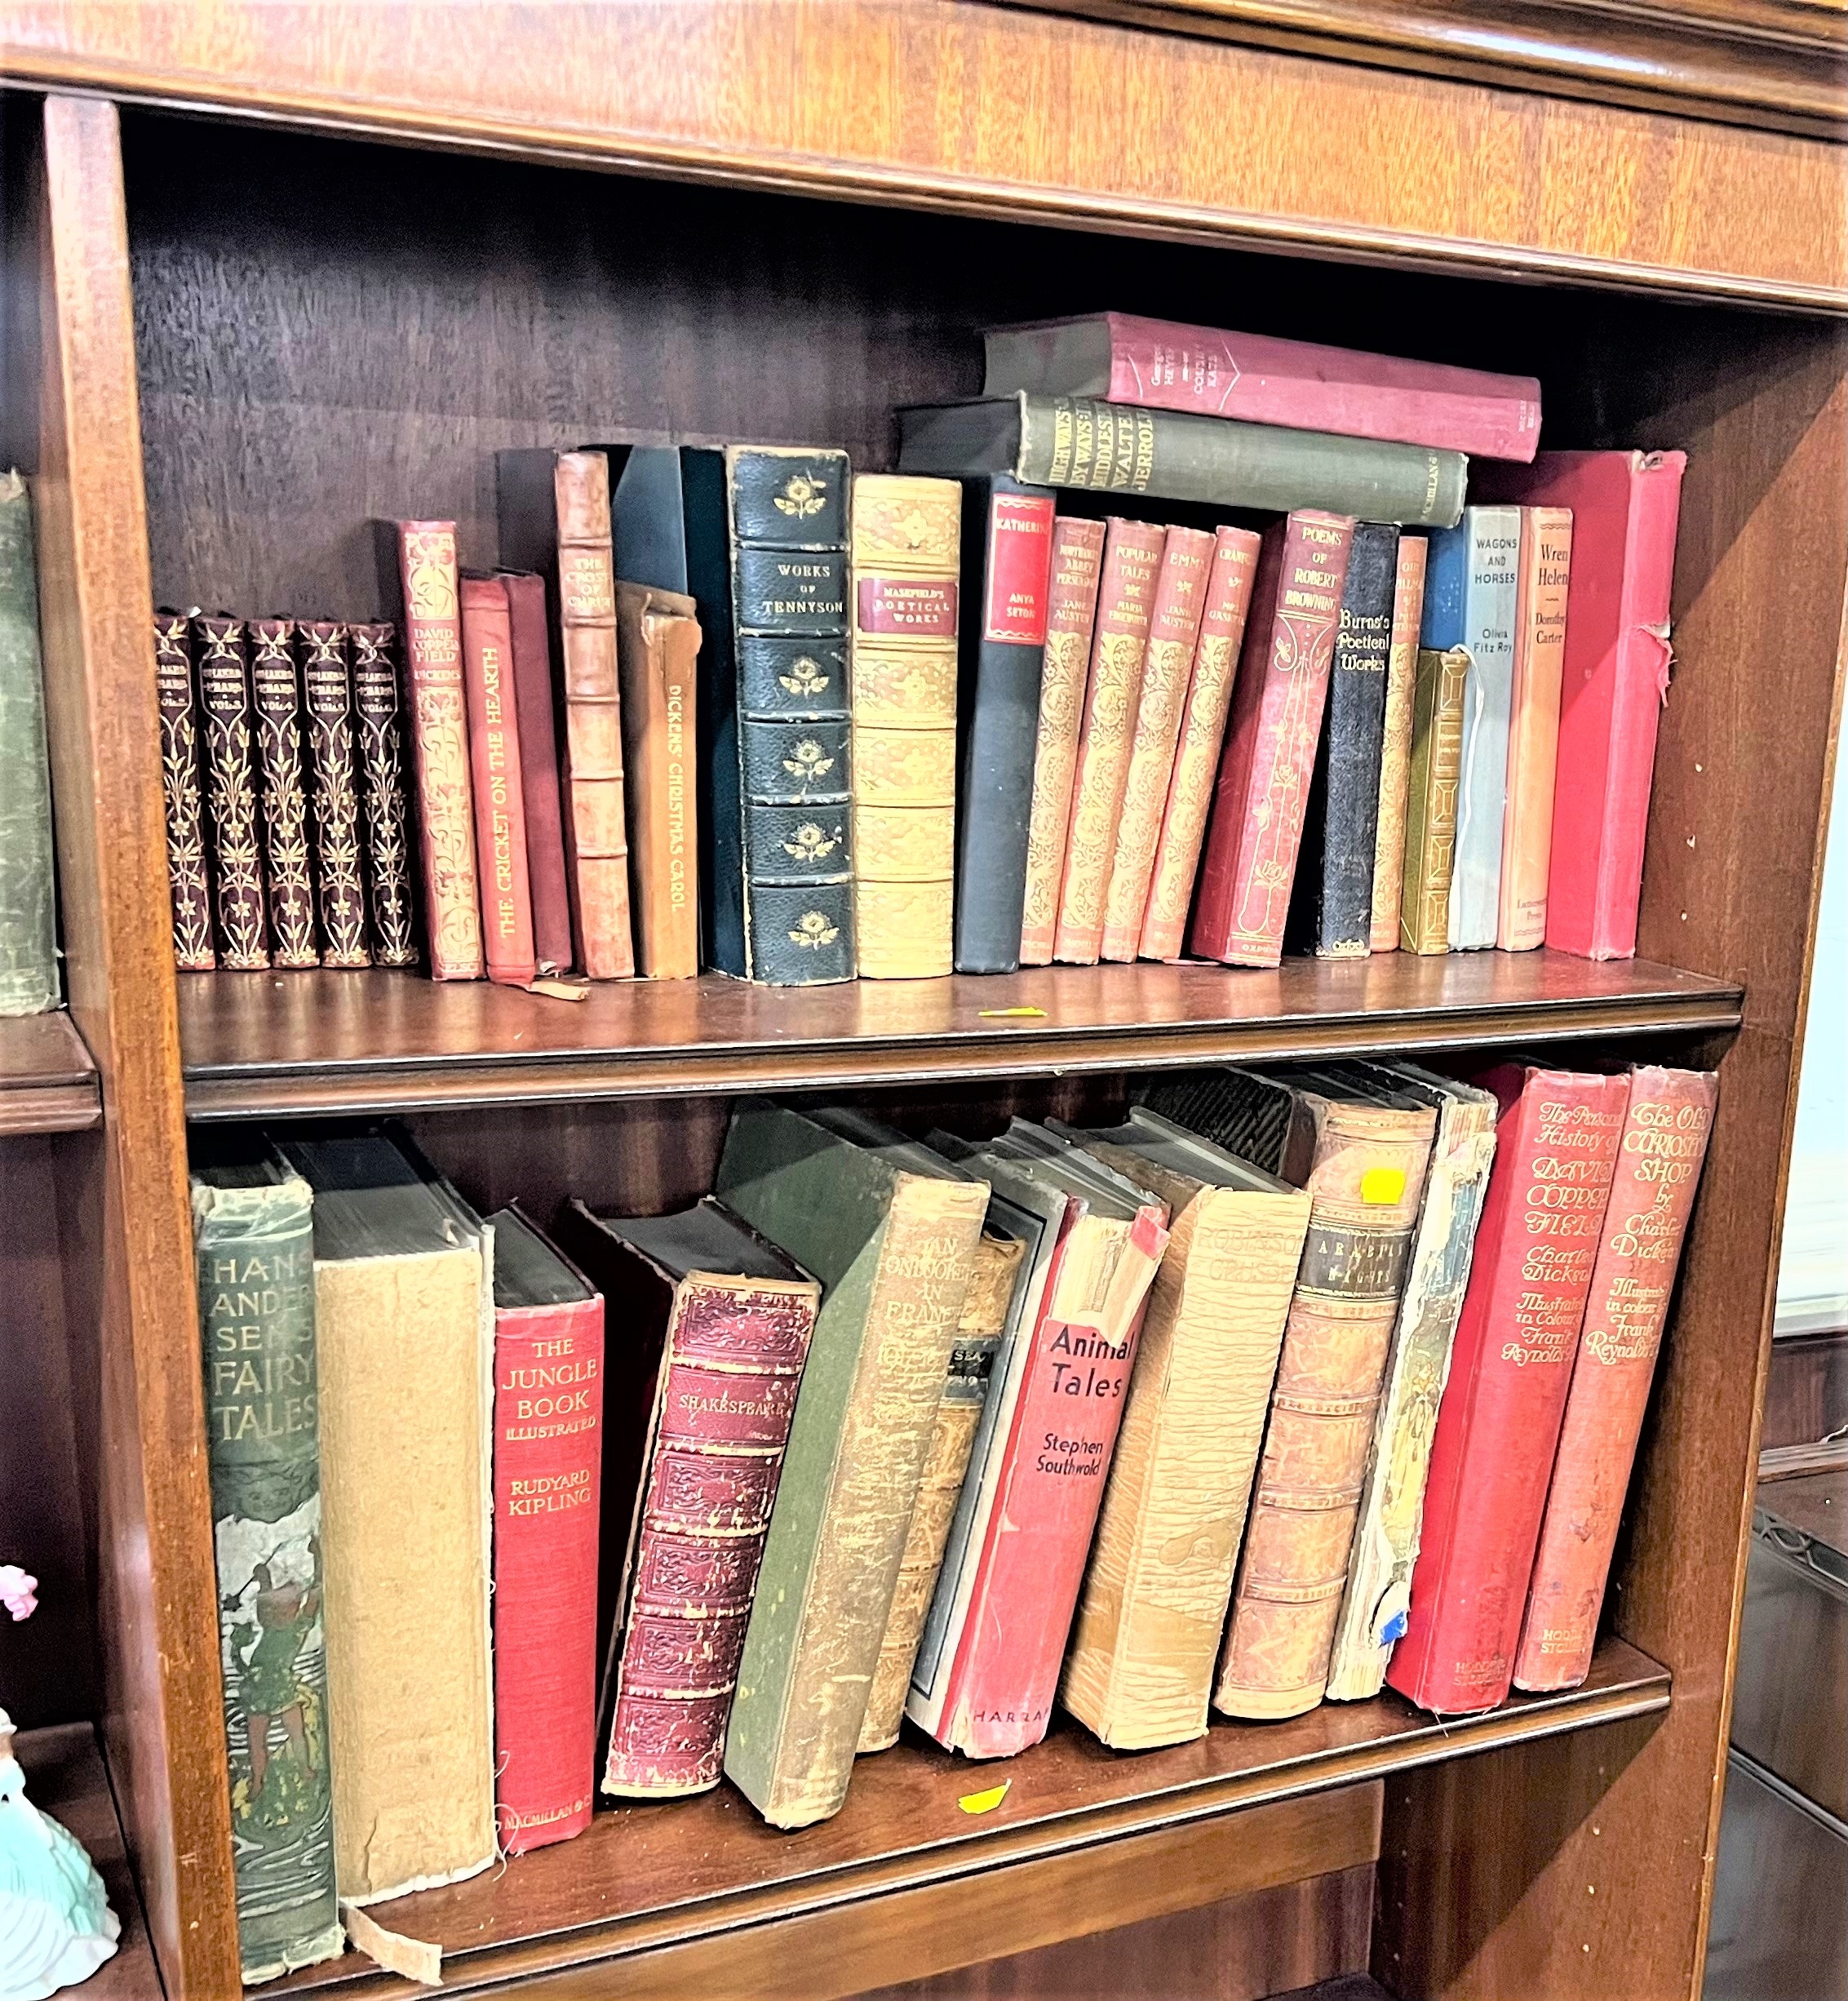 A Quantity of Books. Various authors and titles. Mostly late 19th century.